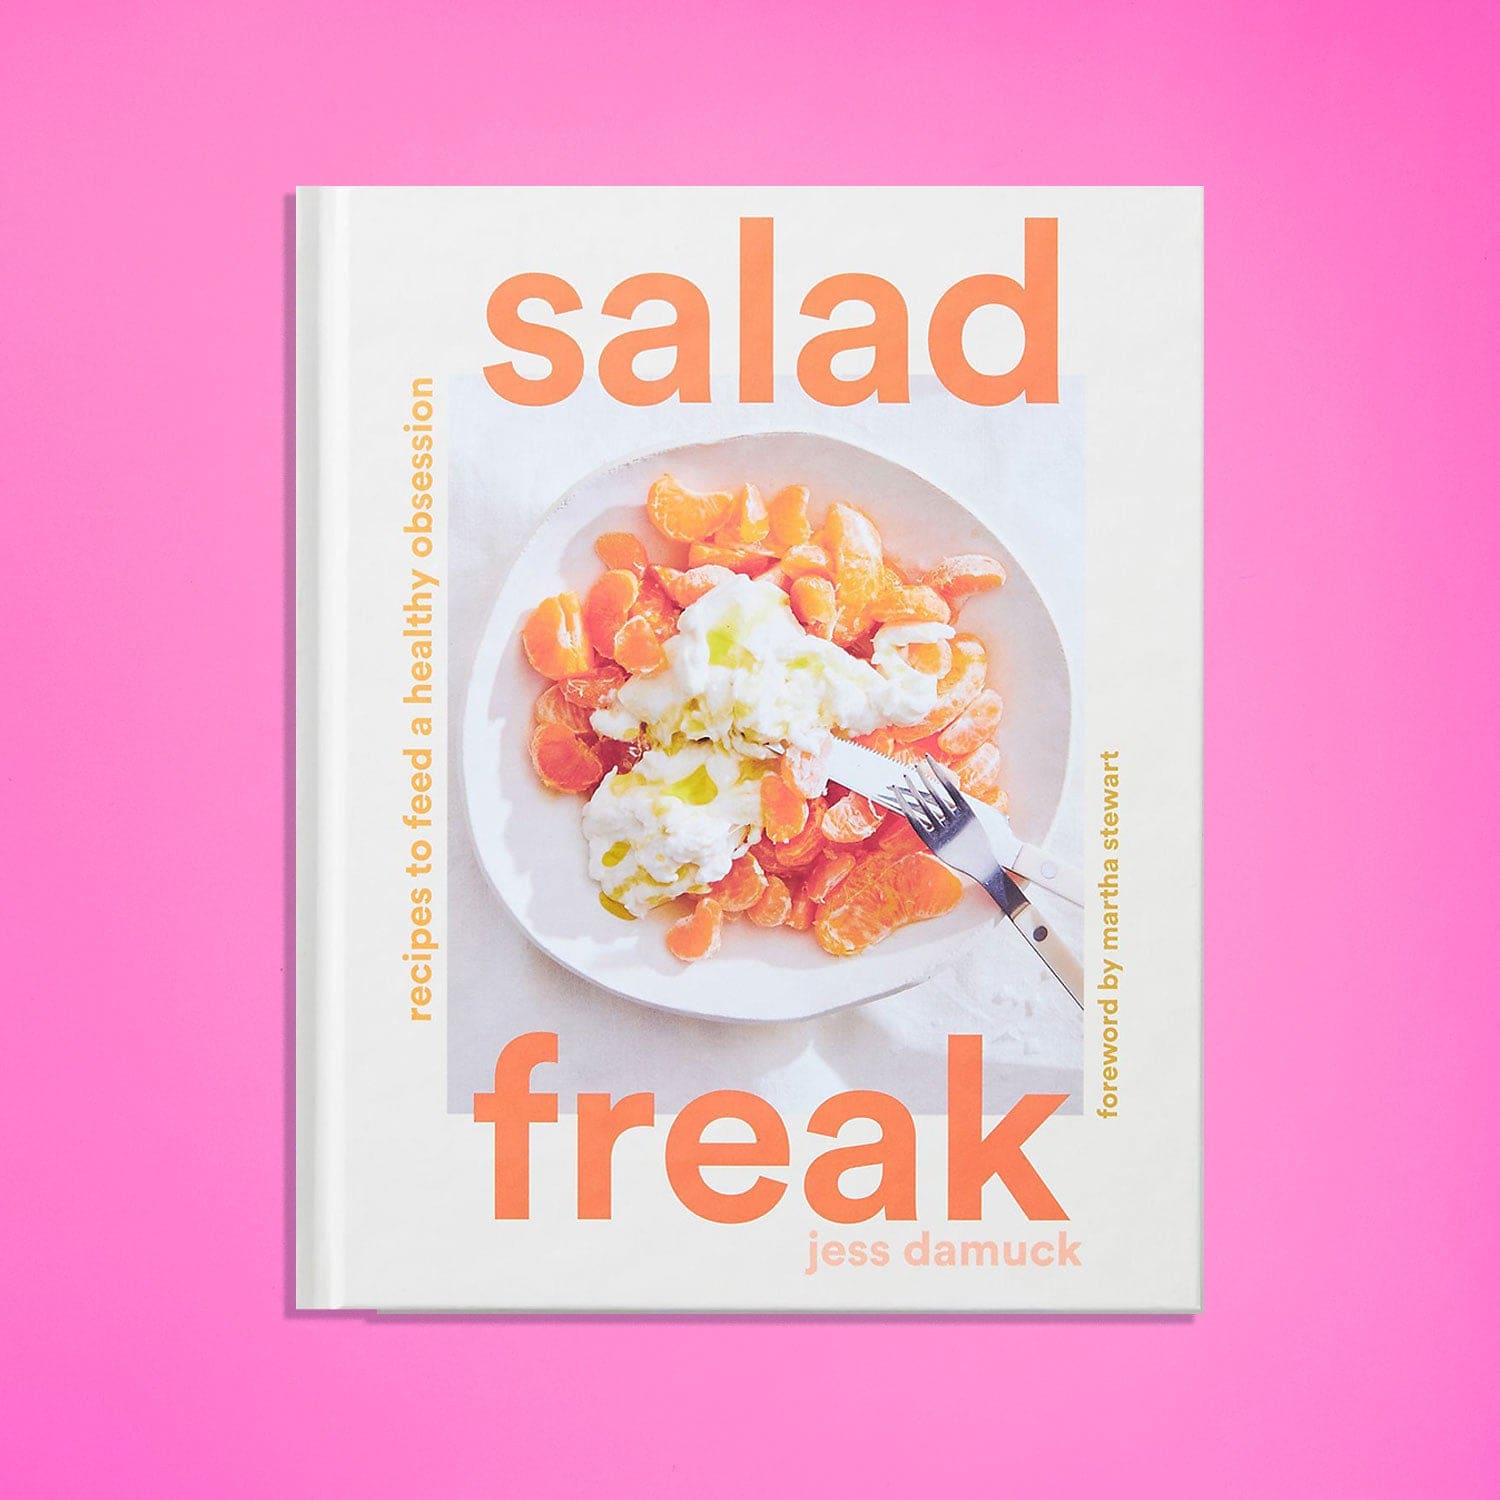 Salad Freak: Recipes to Feed a Healthy Obsession by Jess Damuck